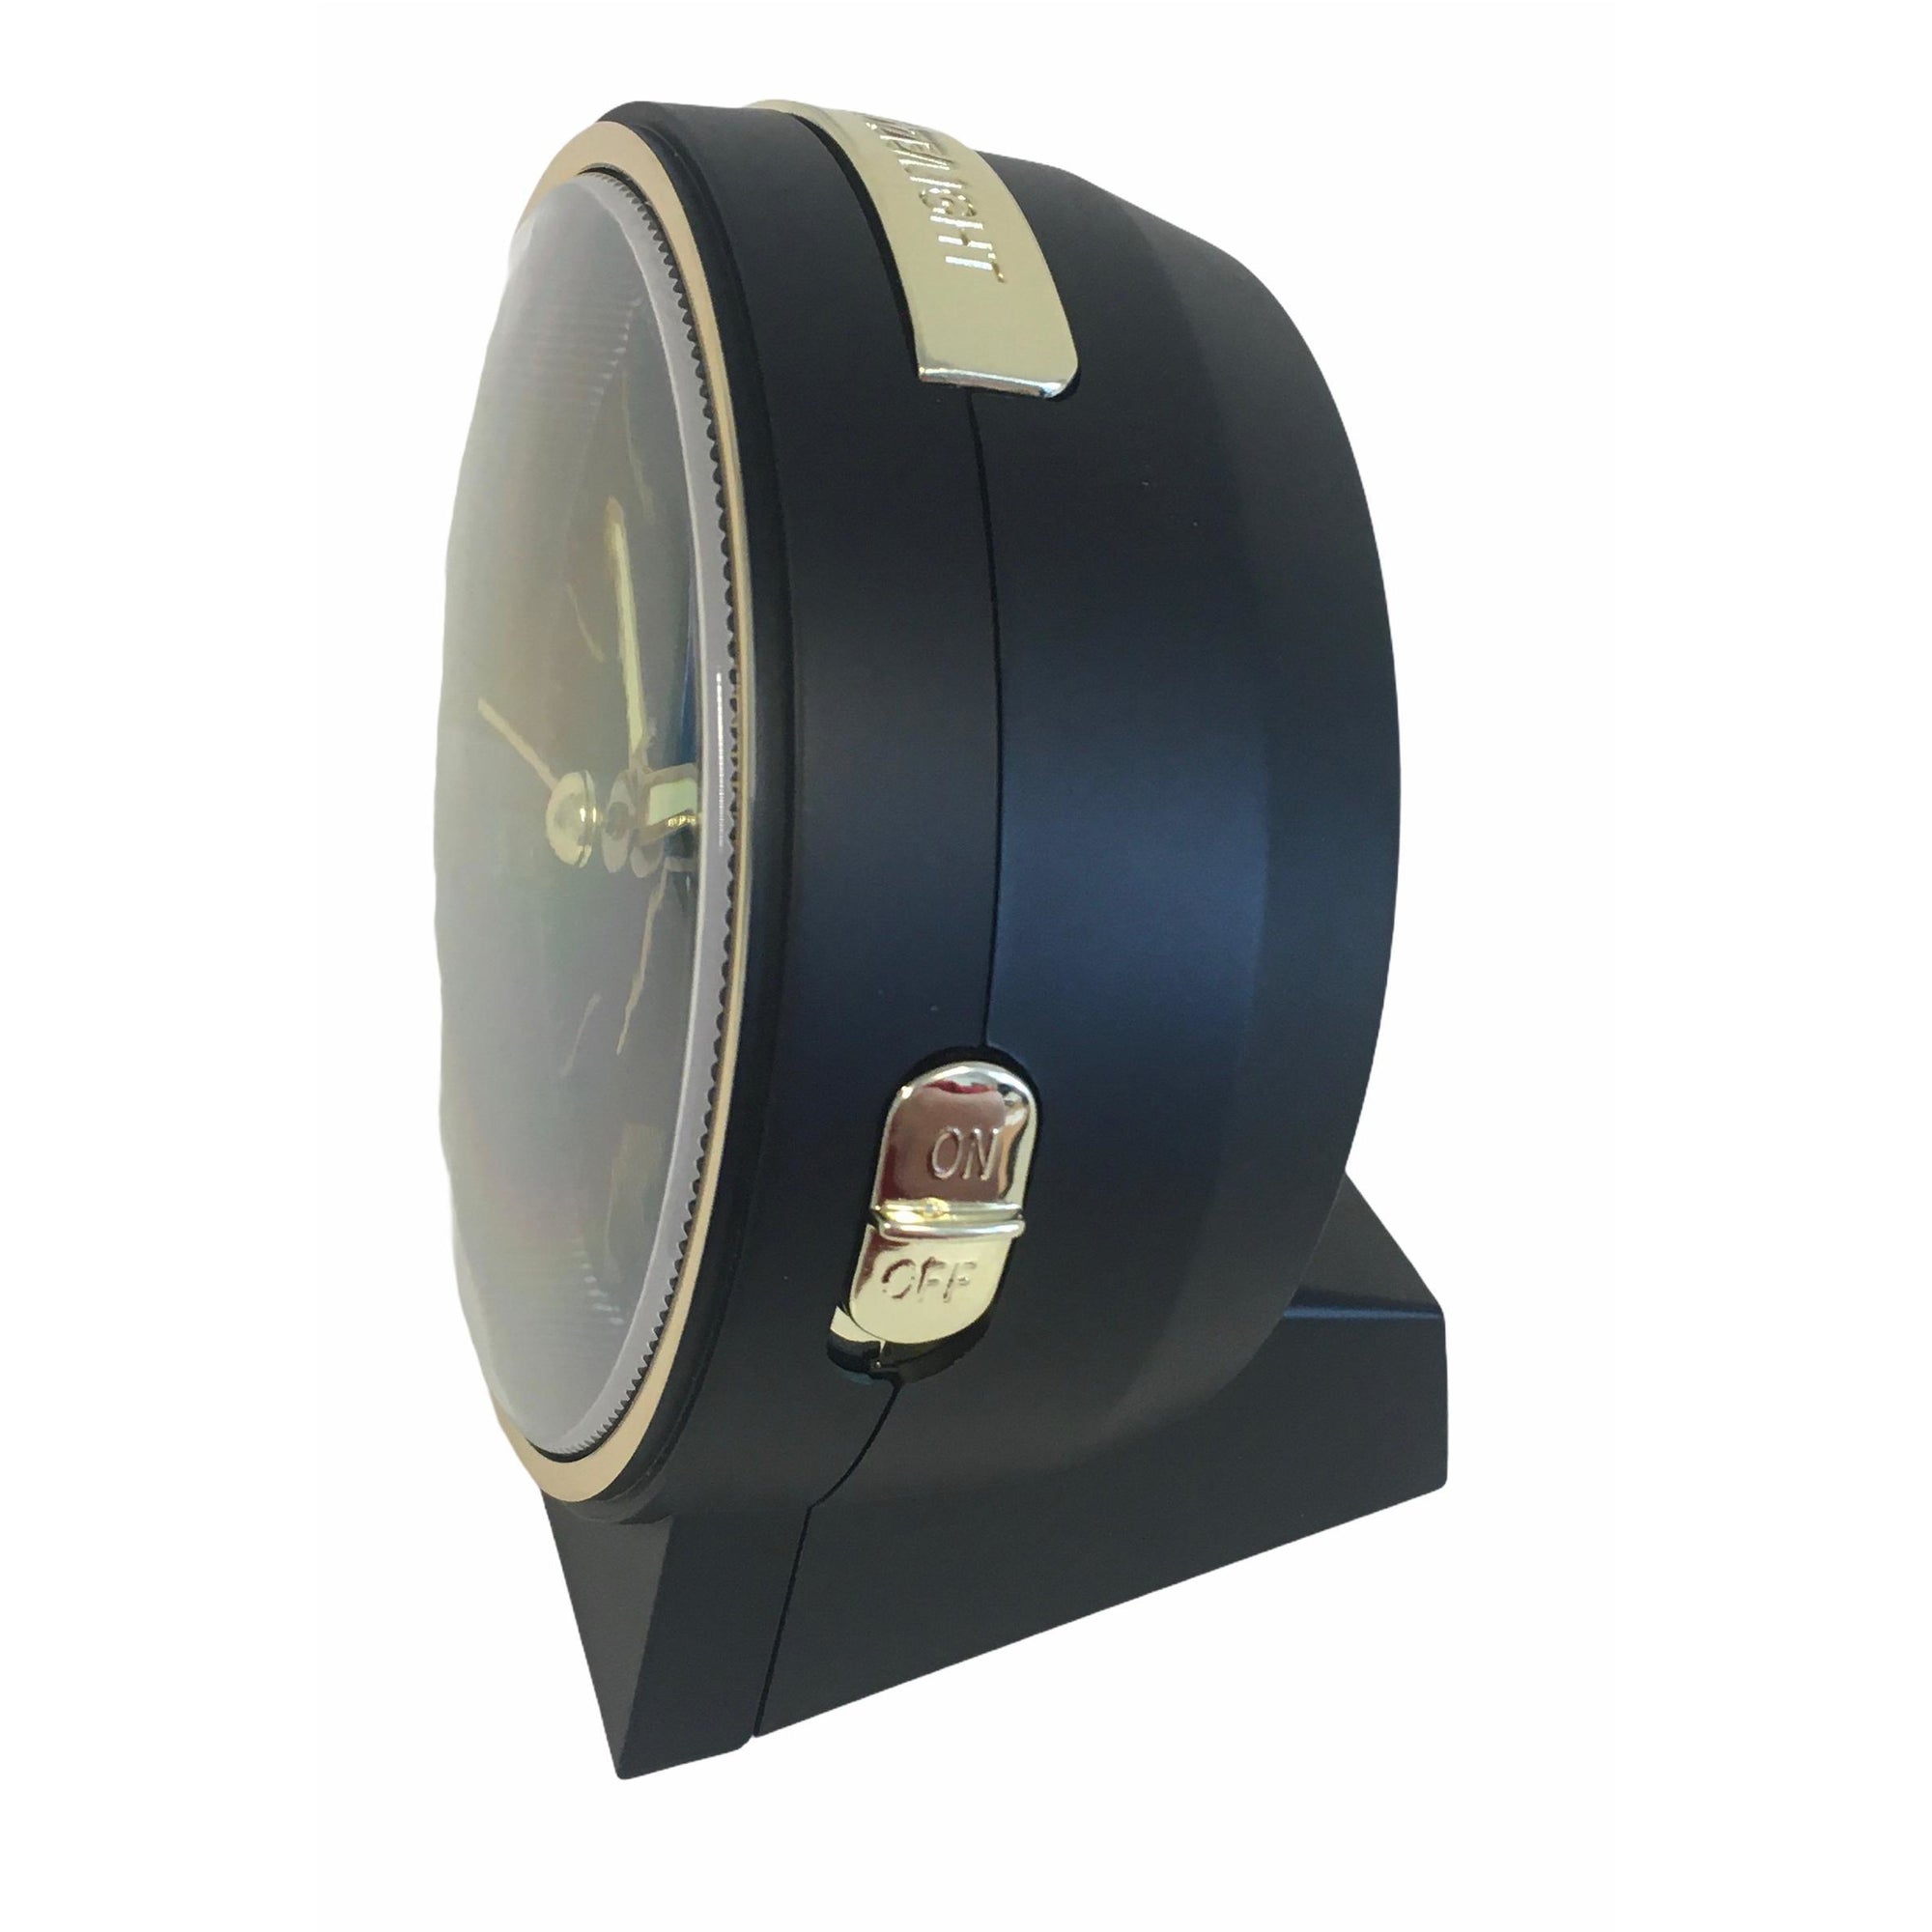 Bell Alarm Clock in Mat Black and Gold Detailing